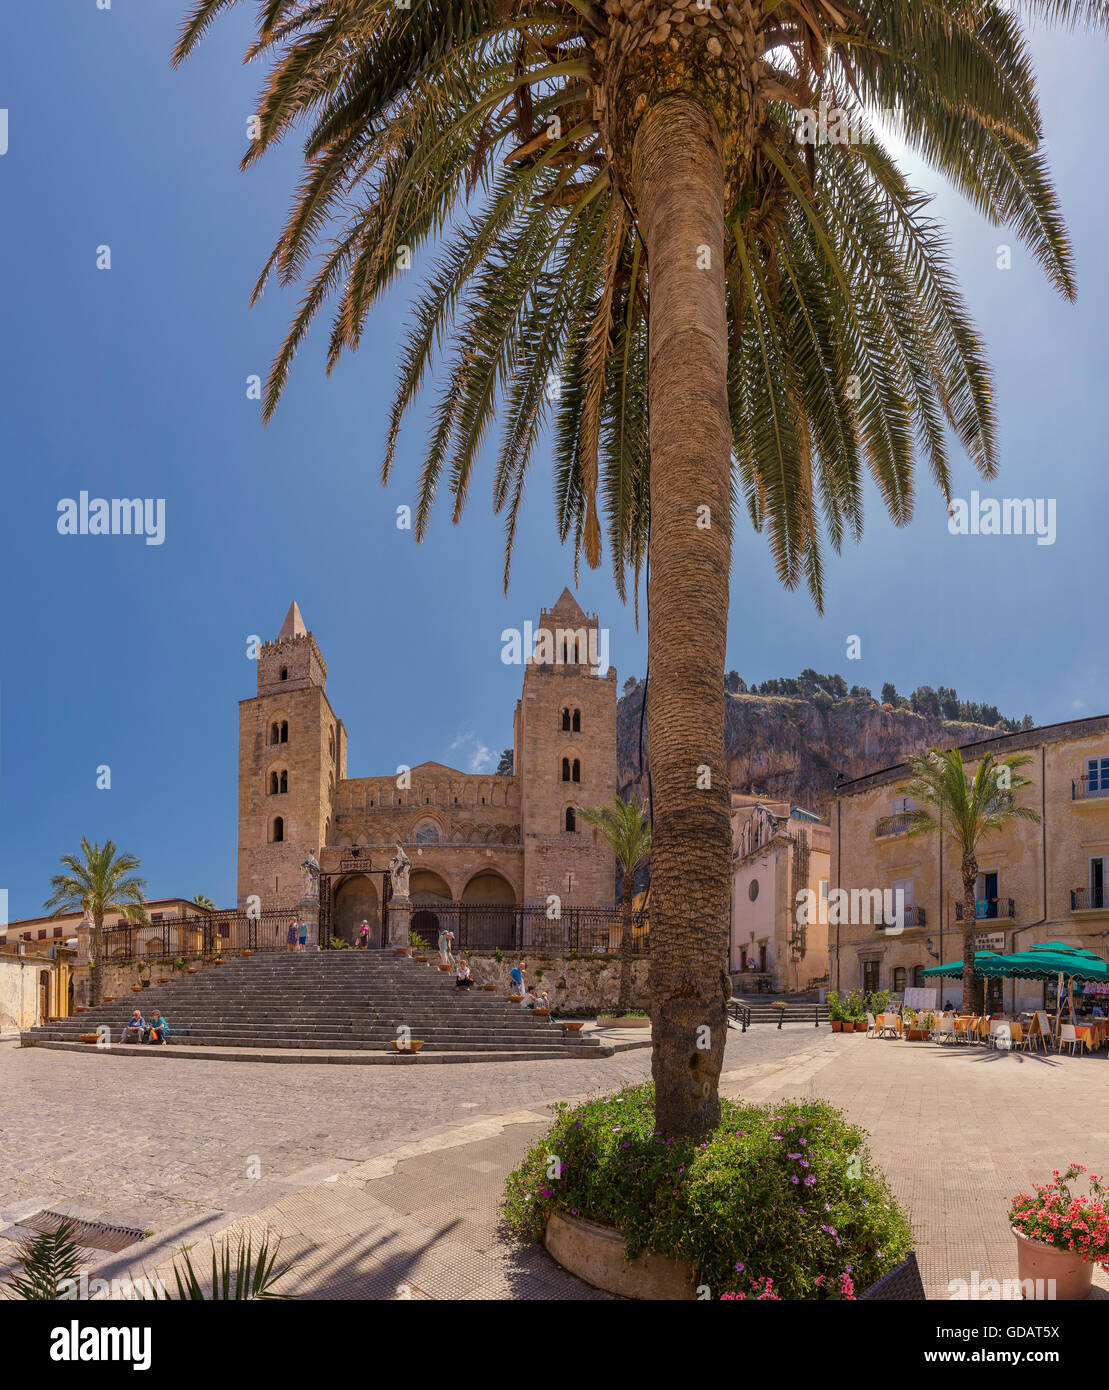 Square in front of the Cefalu cathedral Stock Photo